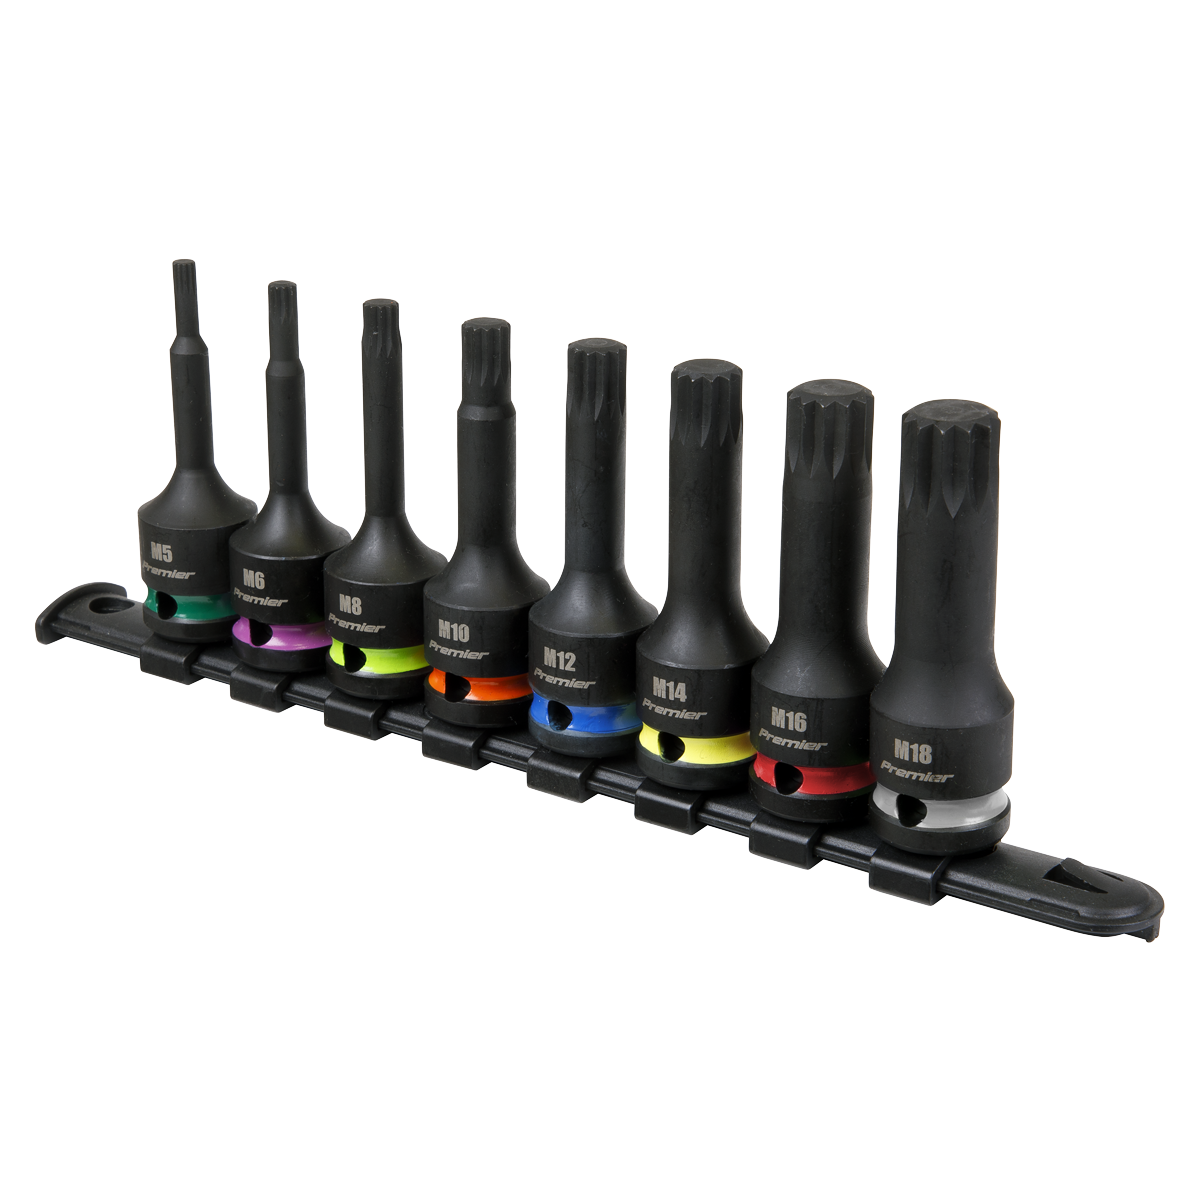 Sealey colour coded impact sockets for easy identification AK56004